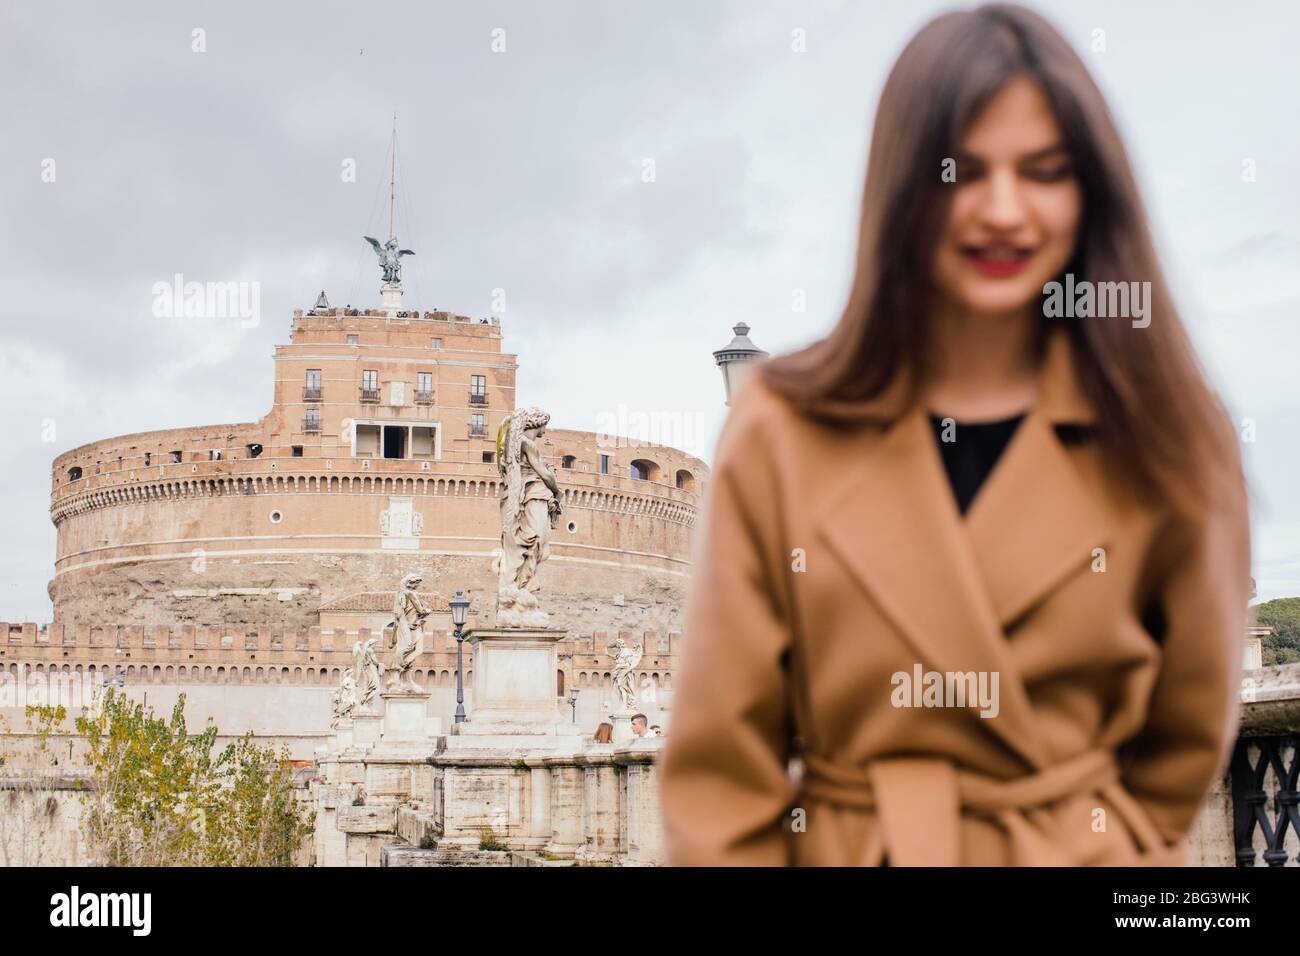 Woman standing in front of Castel Sant'Angelo, Mausoleum of Hadrian, Rome, Lazio, Italy Stock Photo